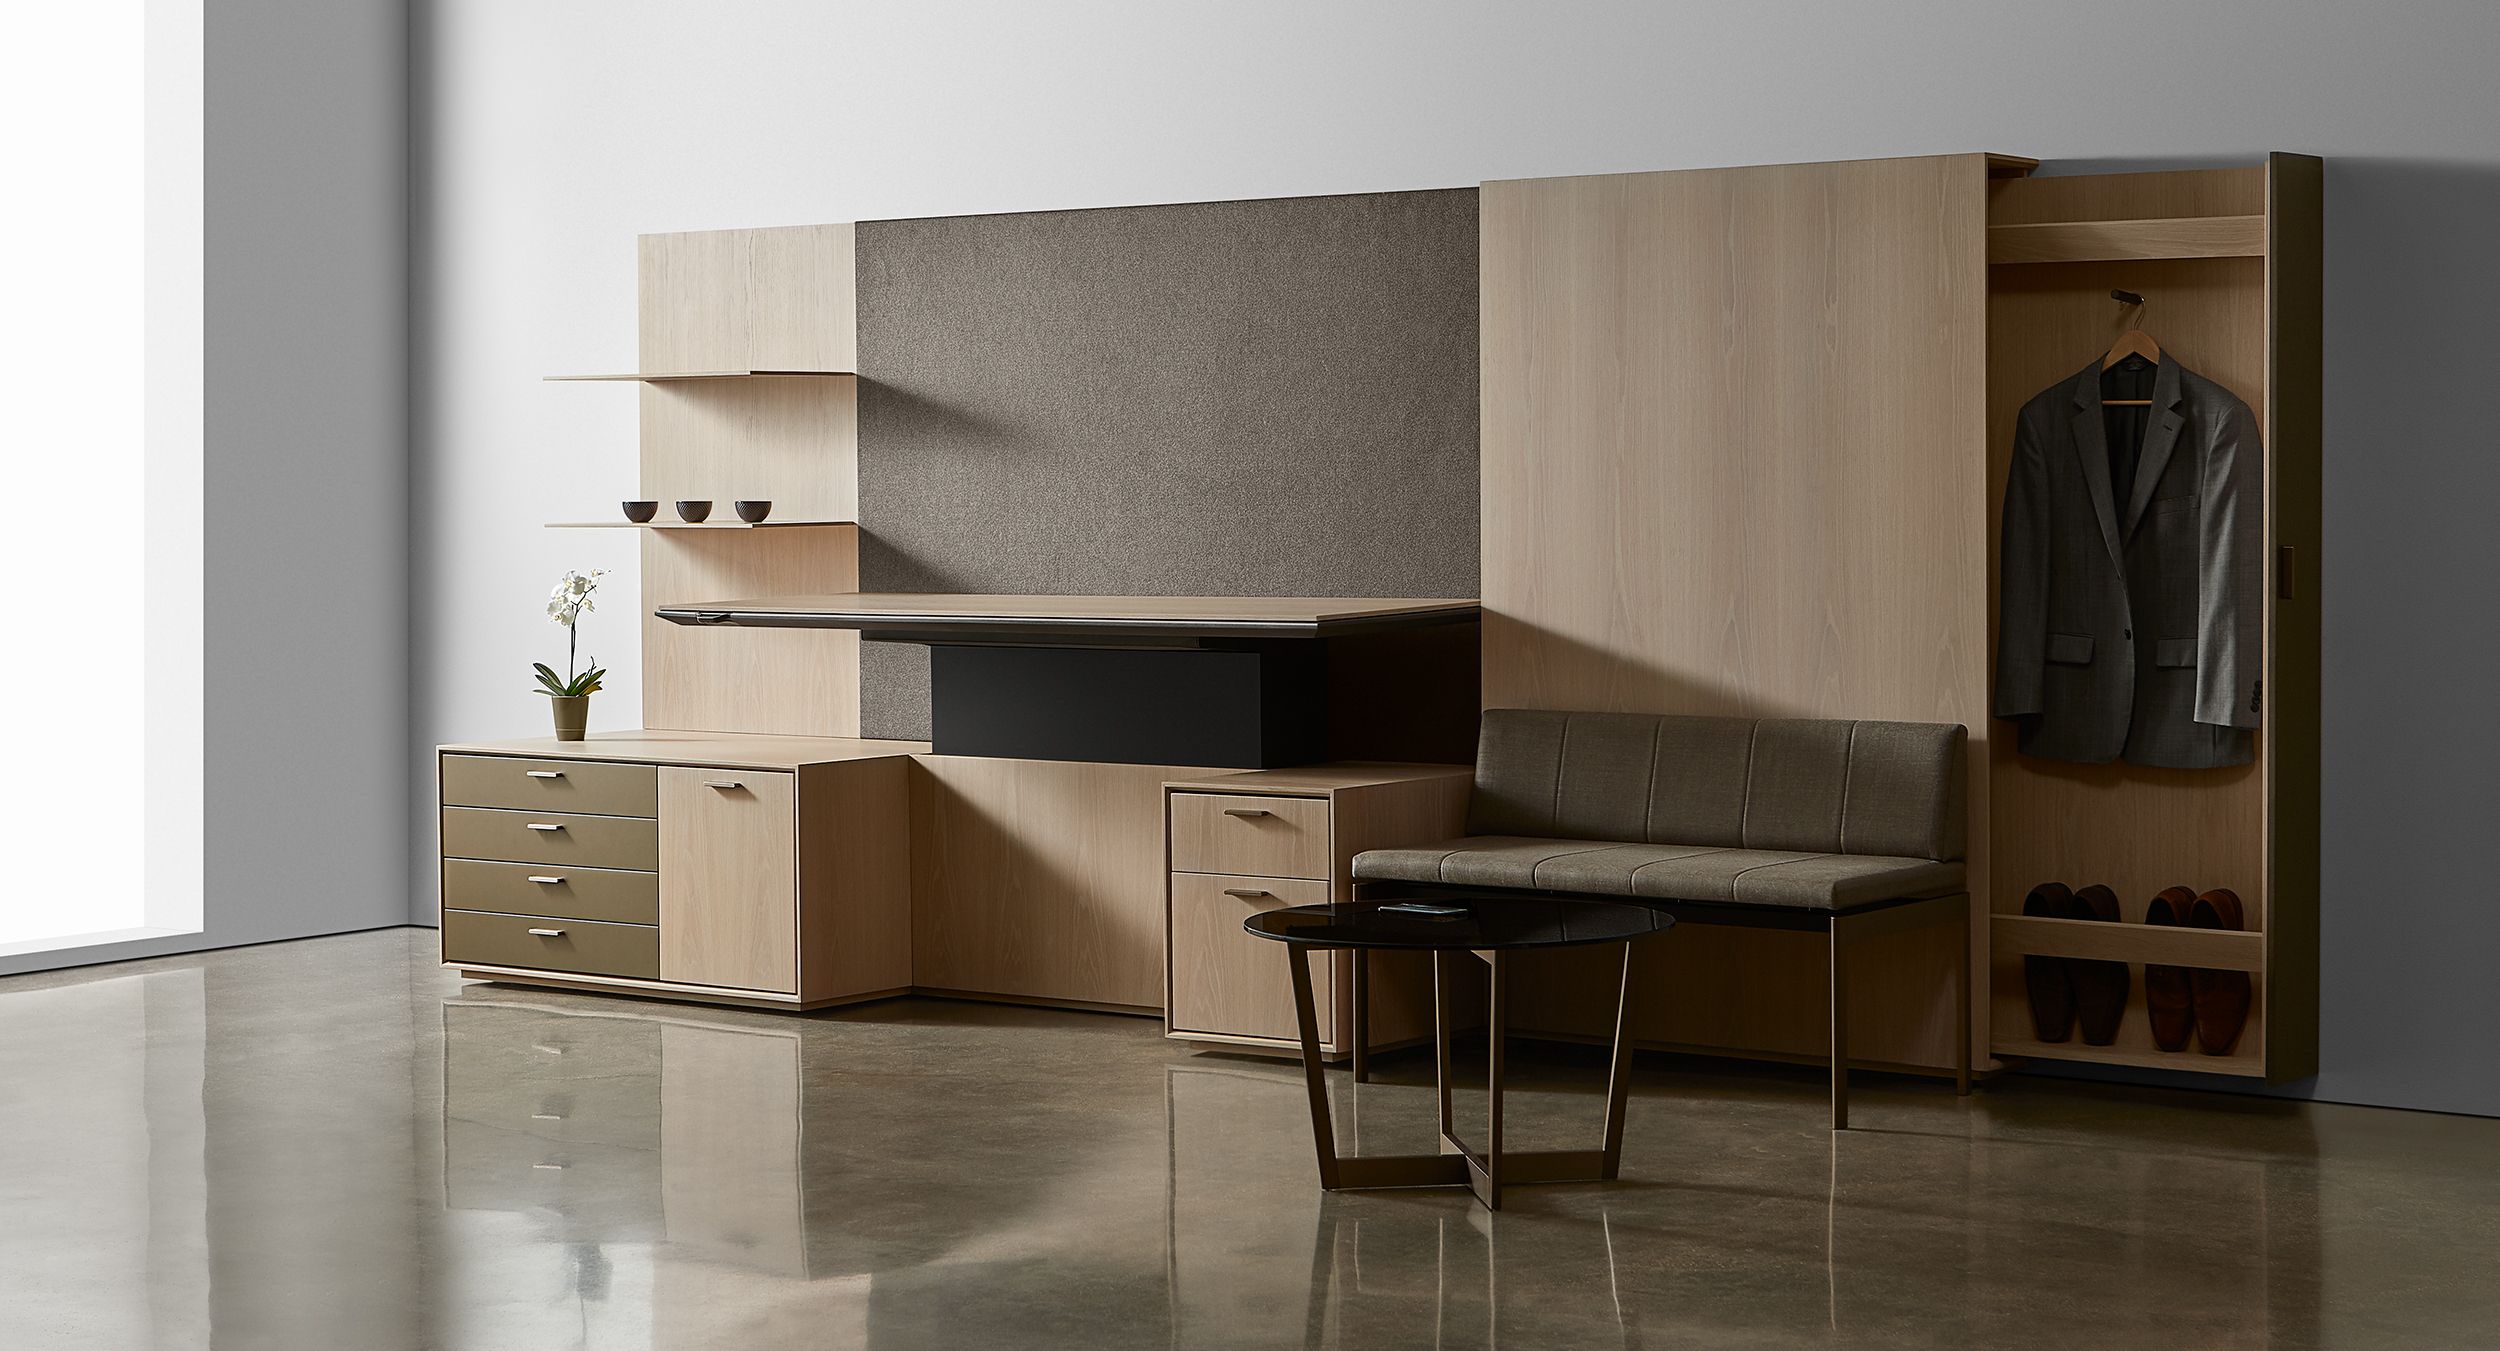 Halo's clean lines conceal an abundance of thoughtful storage options.